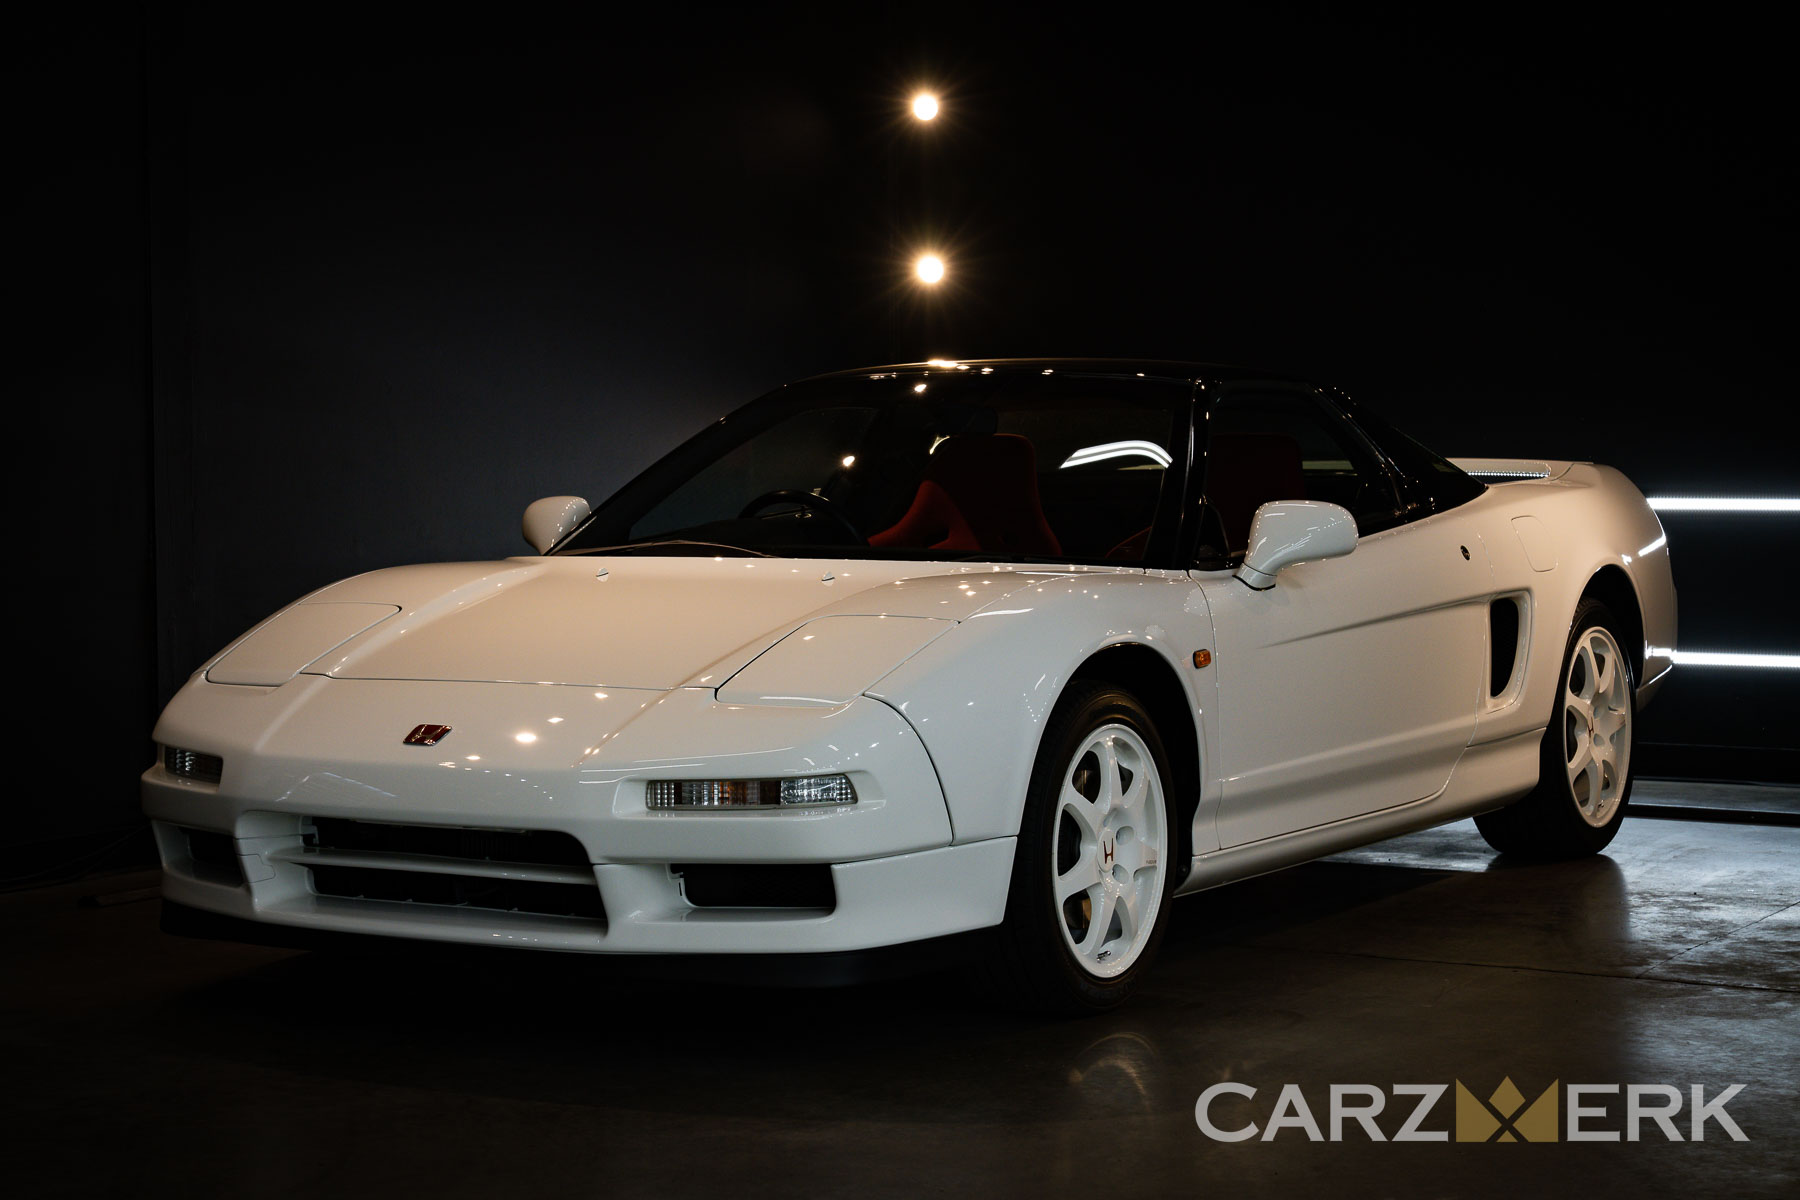 1995 Honda NSX-R Championship White - After Restorative Detailing, Paint Correction, Paint Protection Film and Ceramic Coating